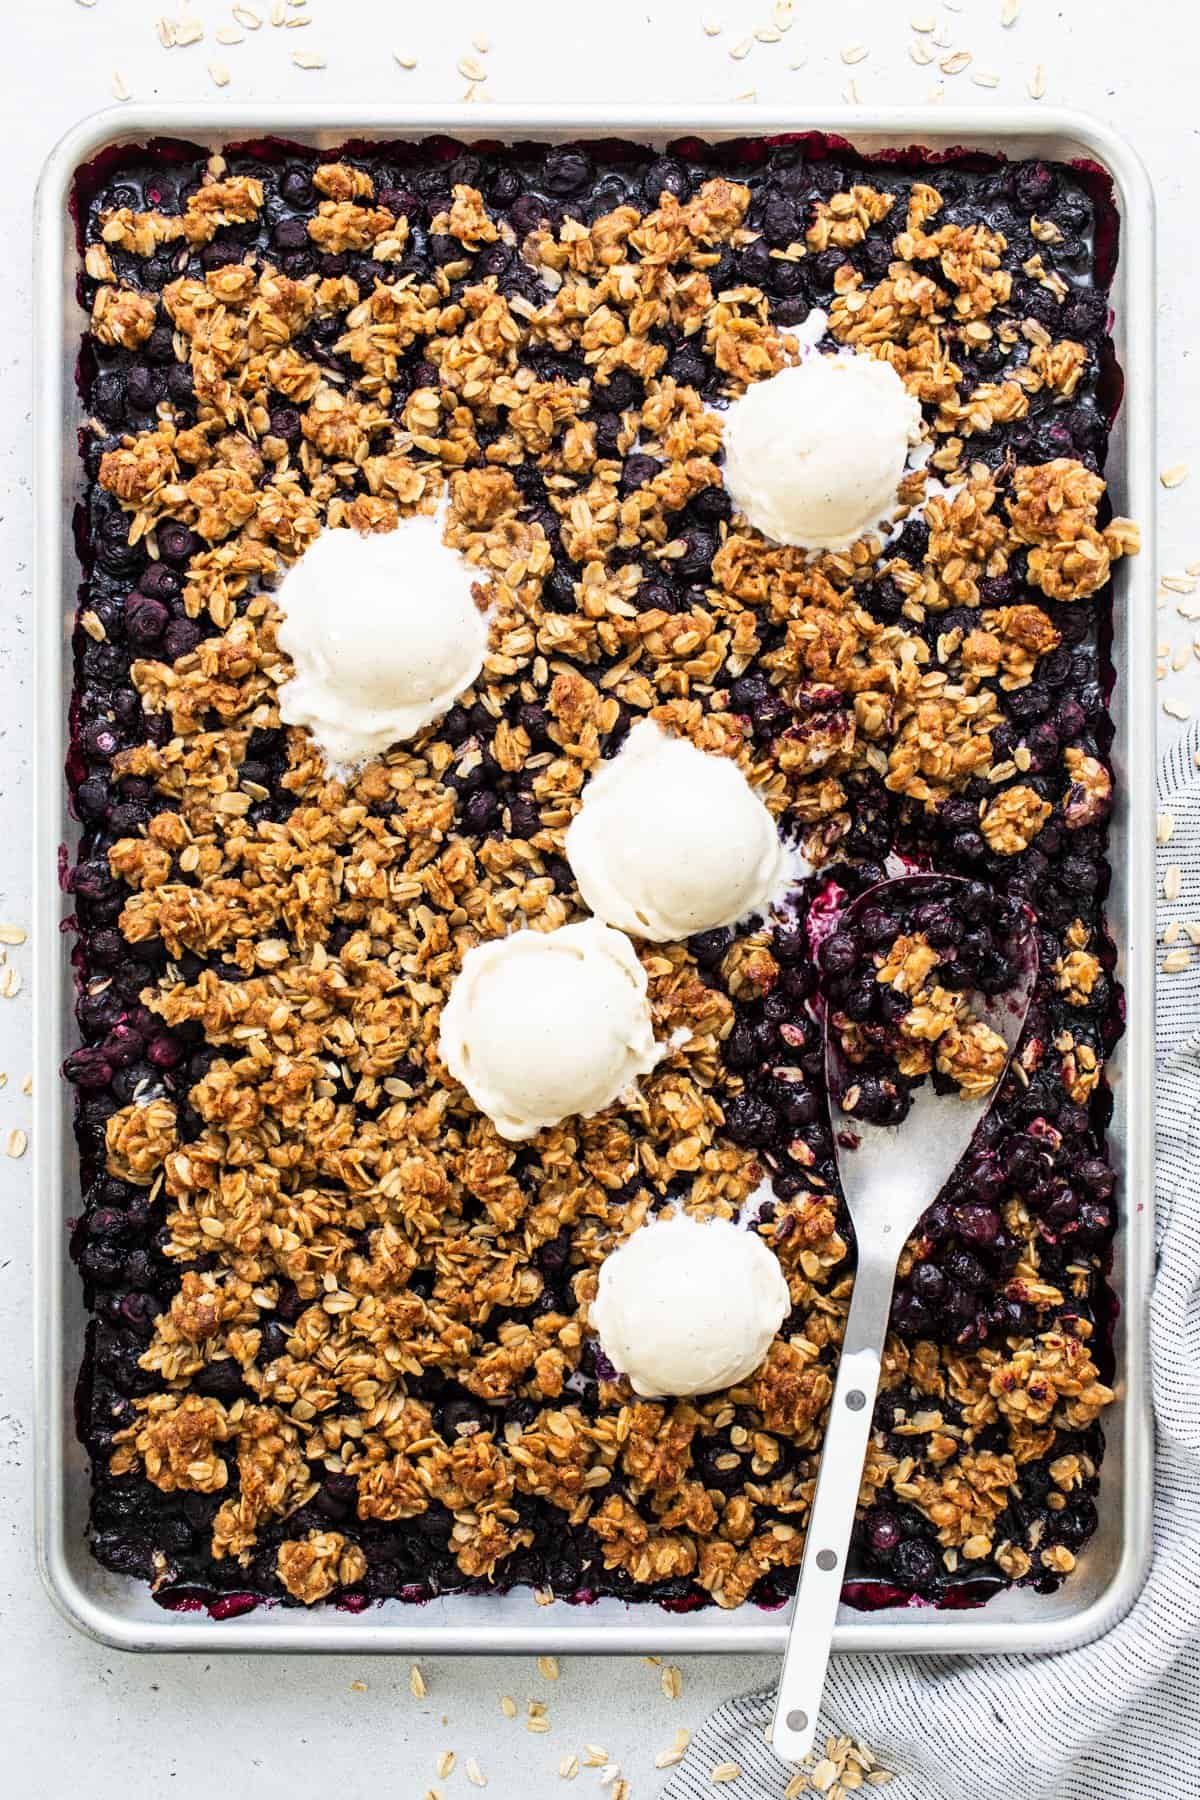 Freshly baked blueberry c،ble with scoops of vanilla ice cream on top.